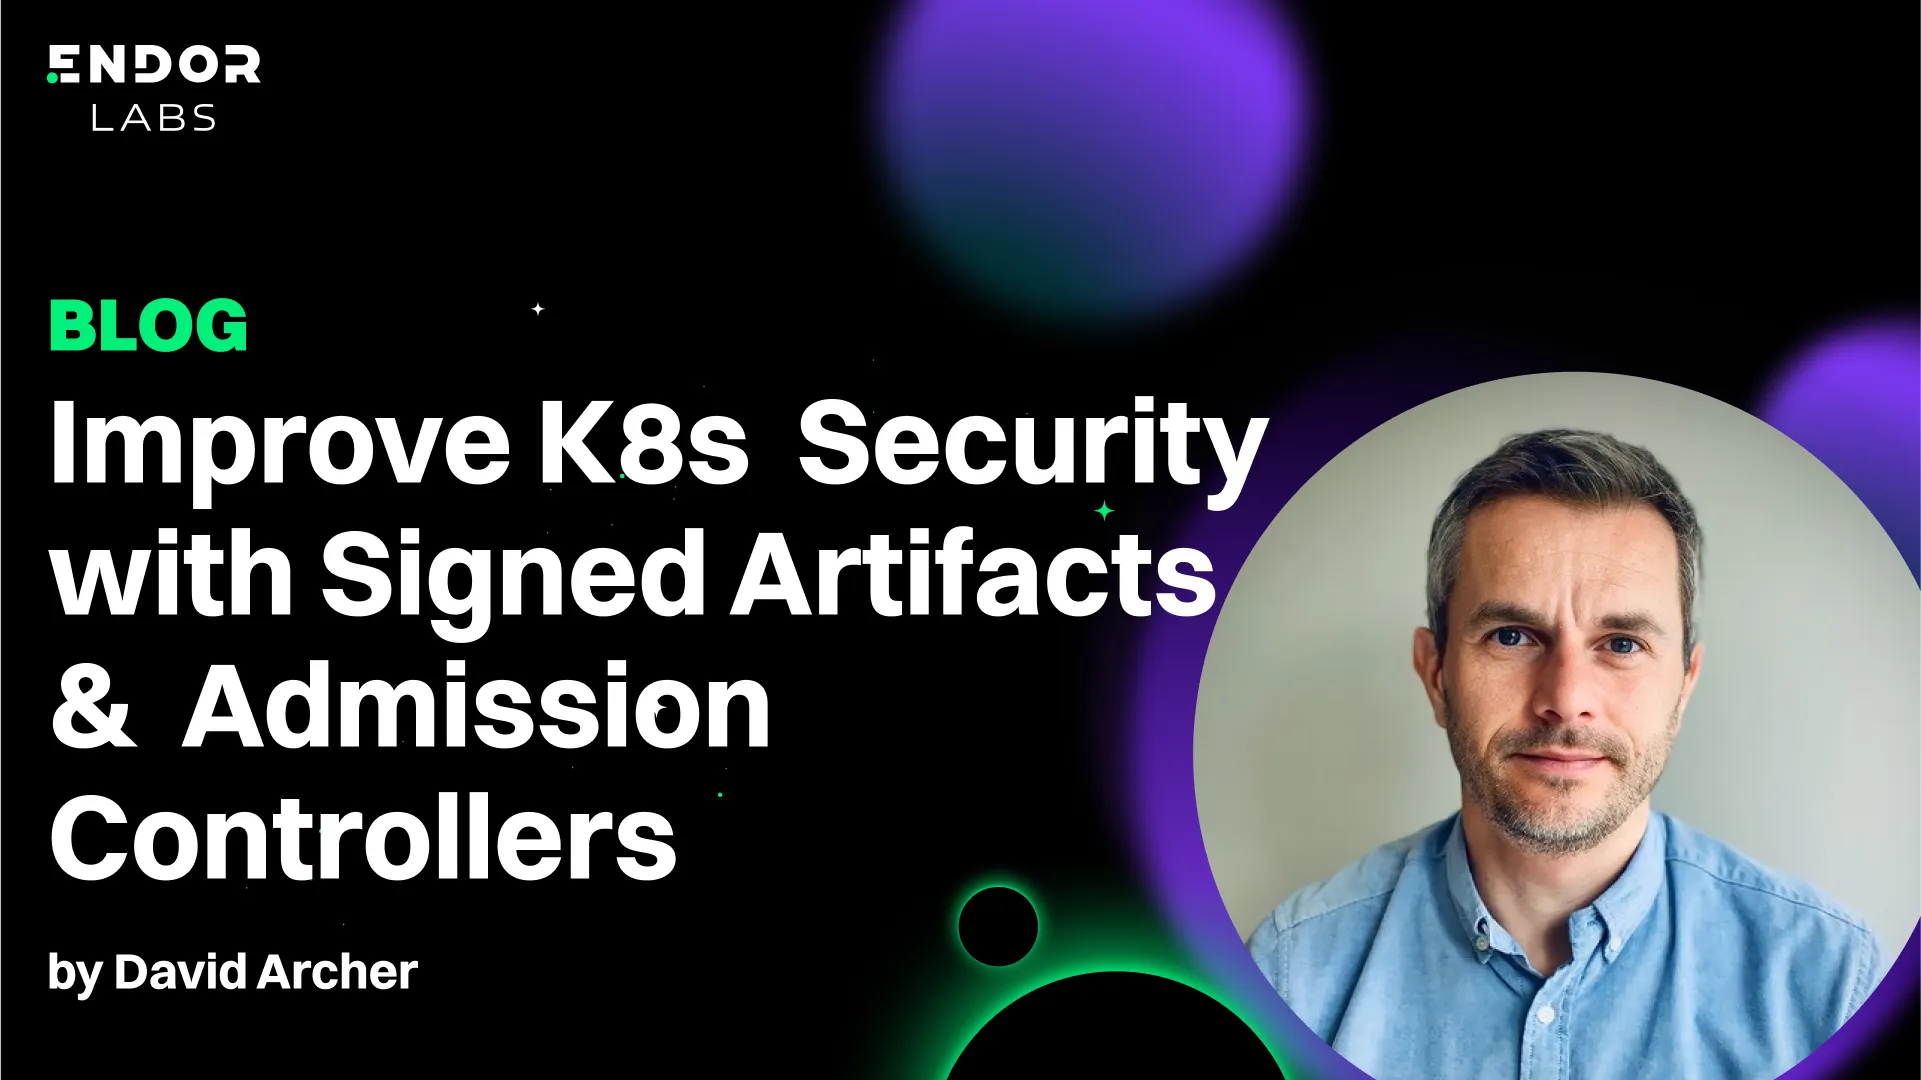 Improve Kubernetes Security with Signed Artifacts and Admission Controllers by David Archer